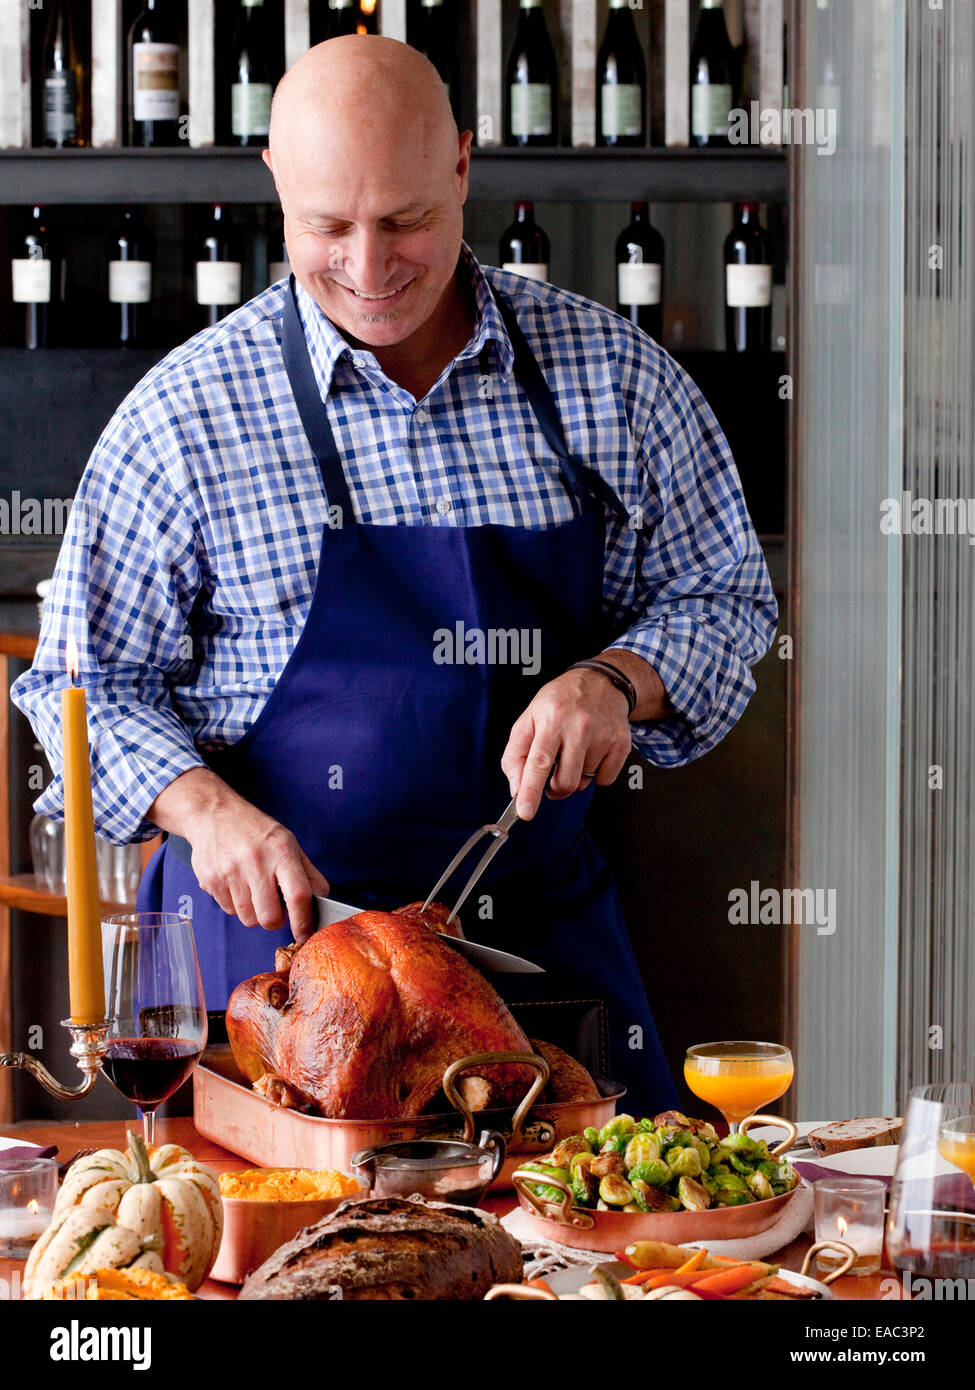 11-7-2013, New York, NY  Chef Tom Colicchio prepares a Thanksgiving meal at his restuarant Kraft. Stock Photo